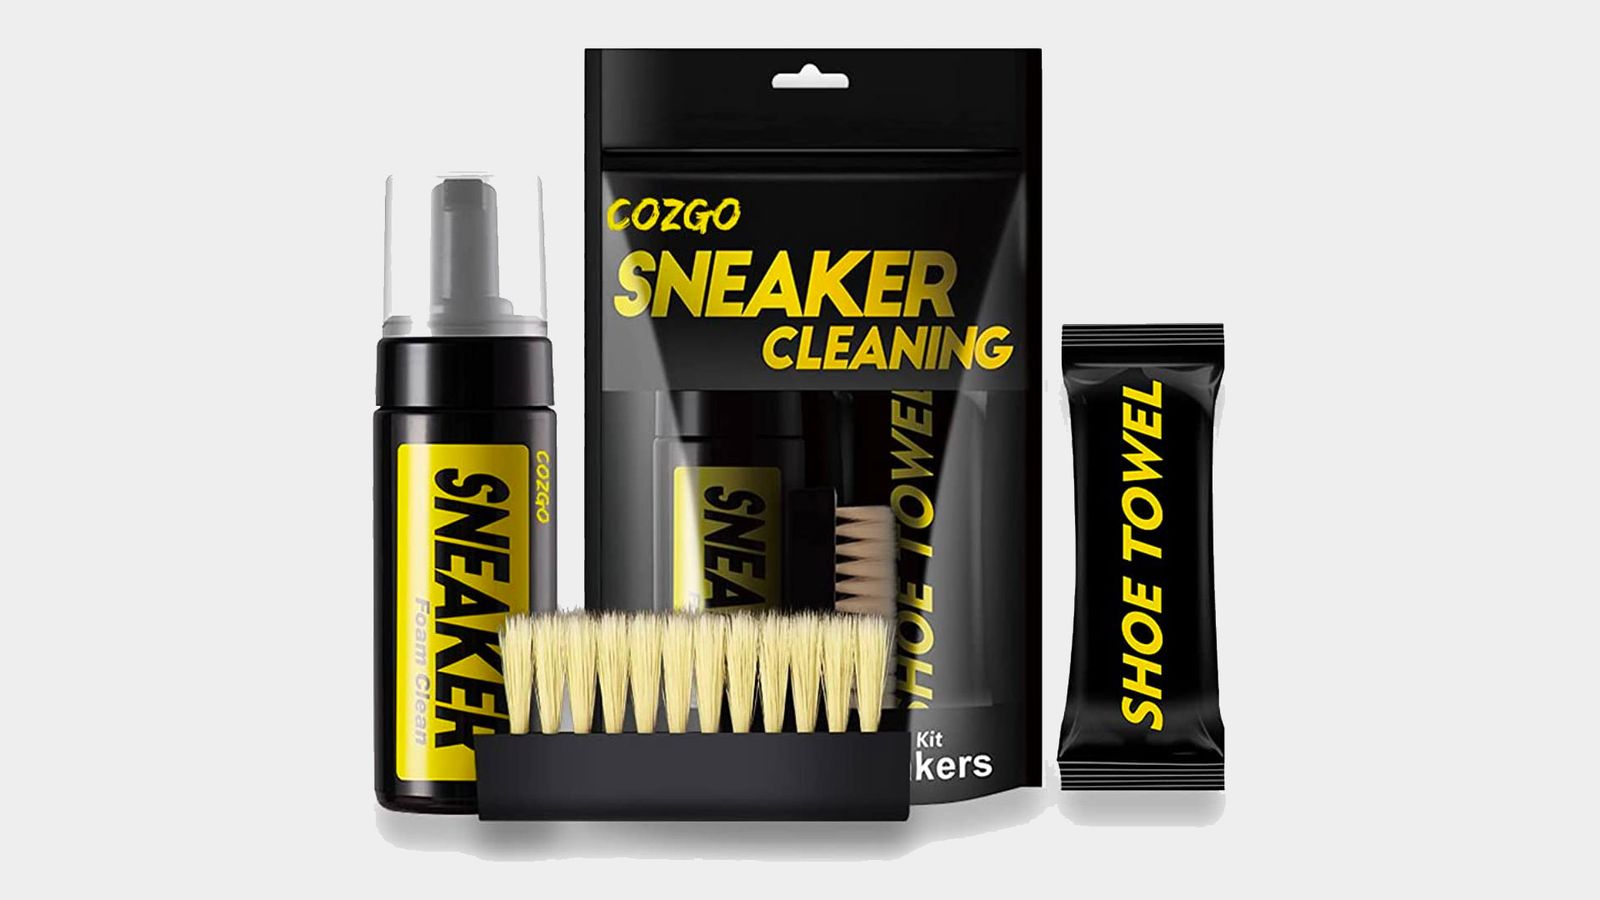 COZGO Shoe Cleaner Kit product image of a black and yellow cleaning kit with a spray bottle, towel, and brush.